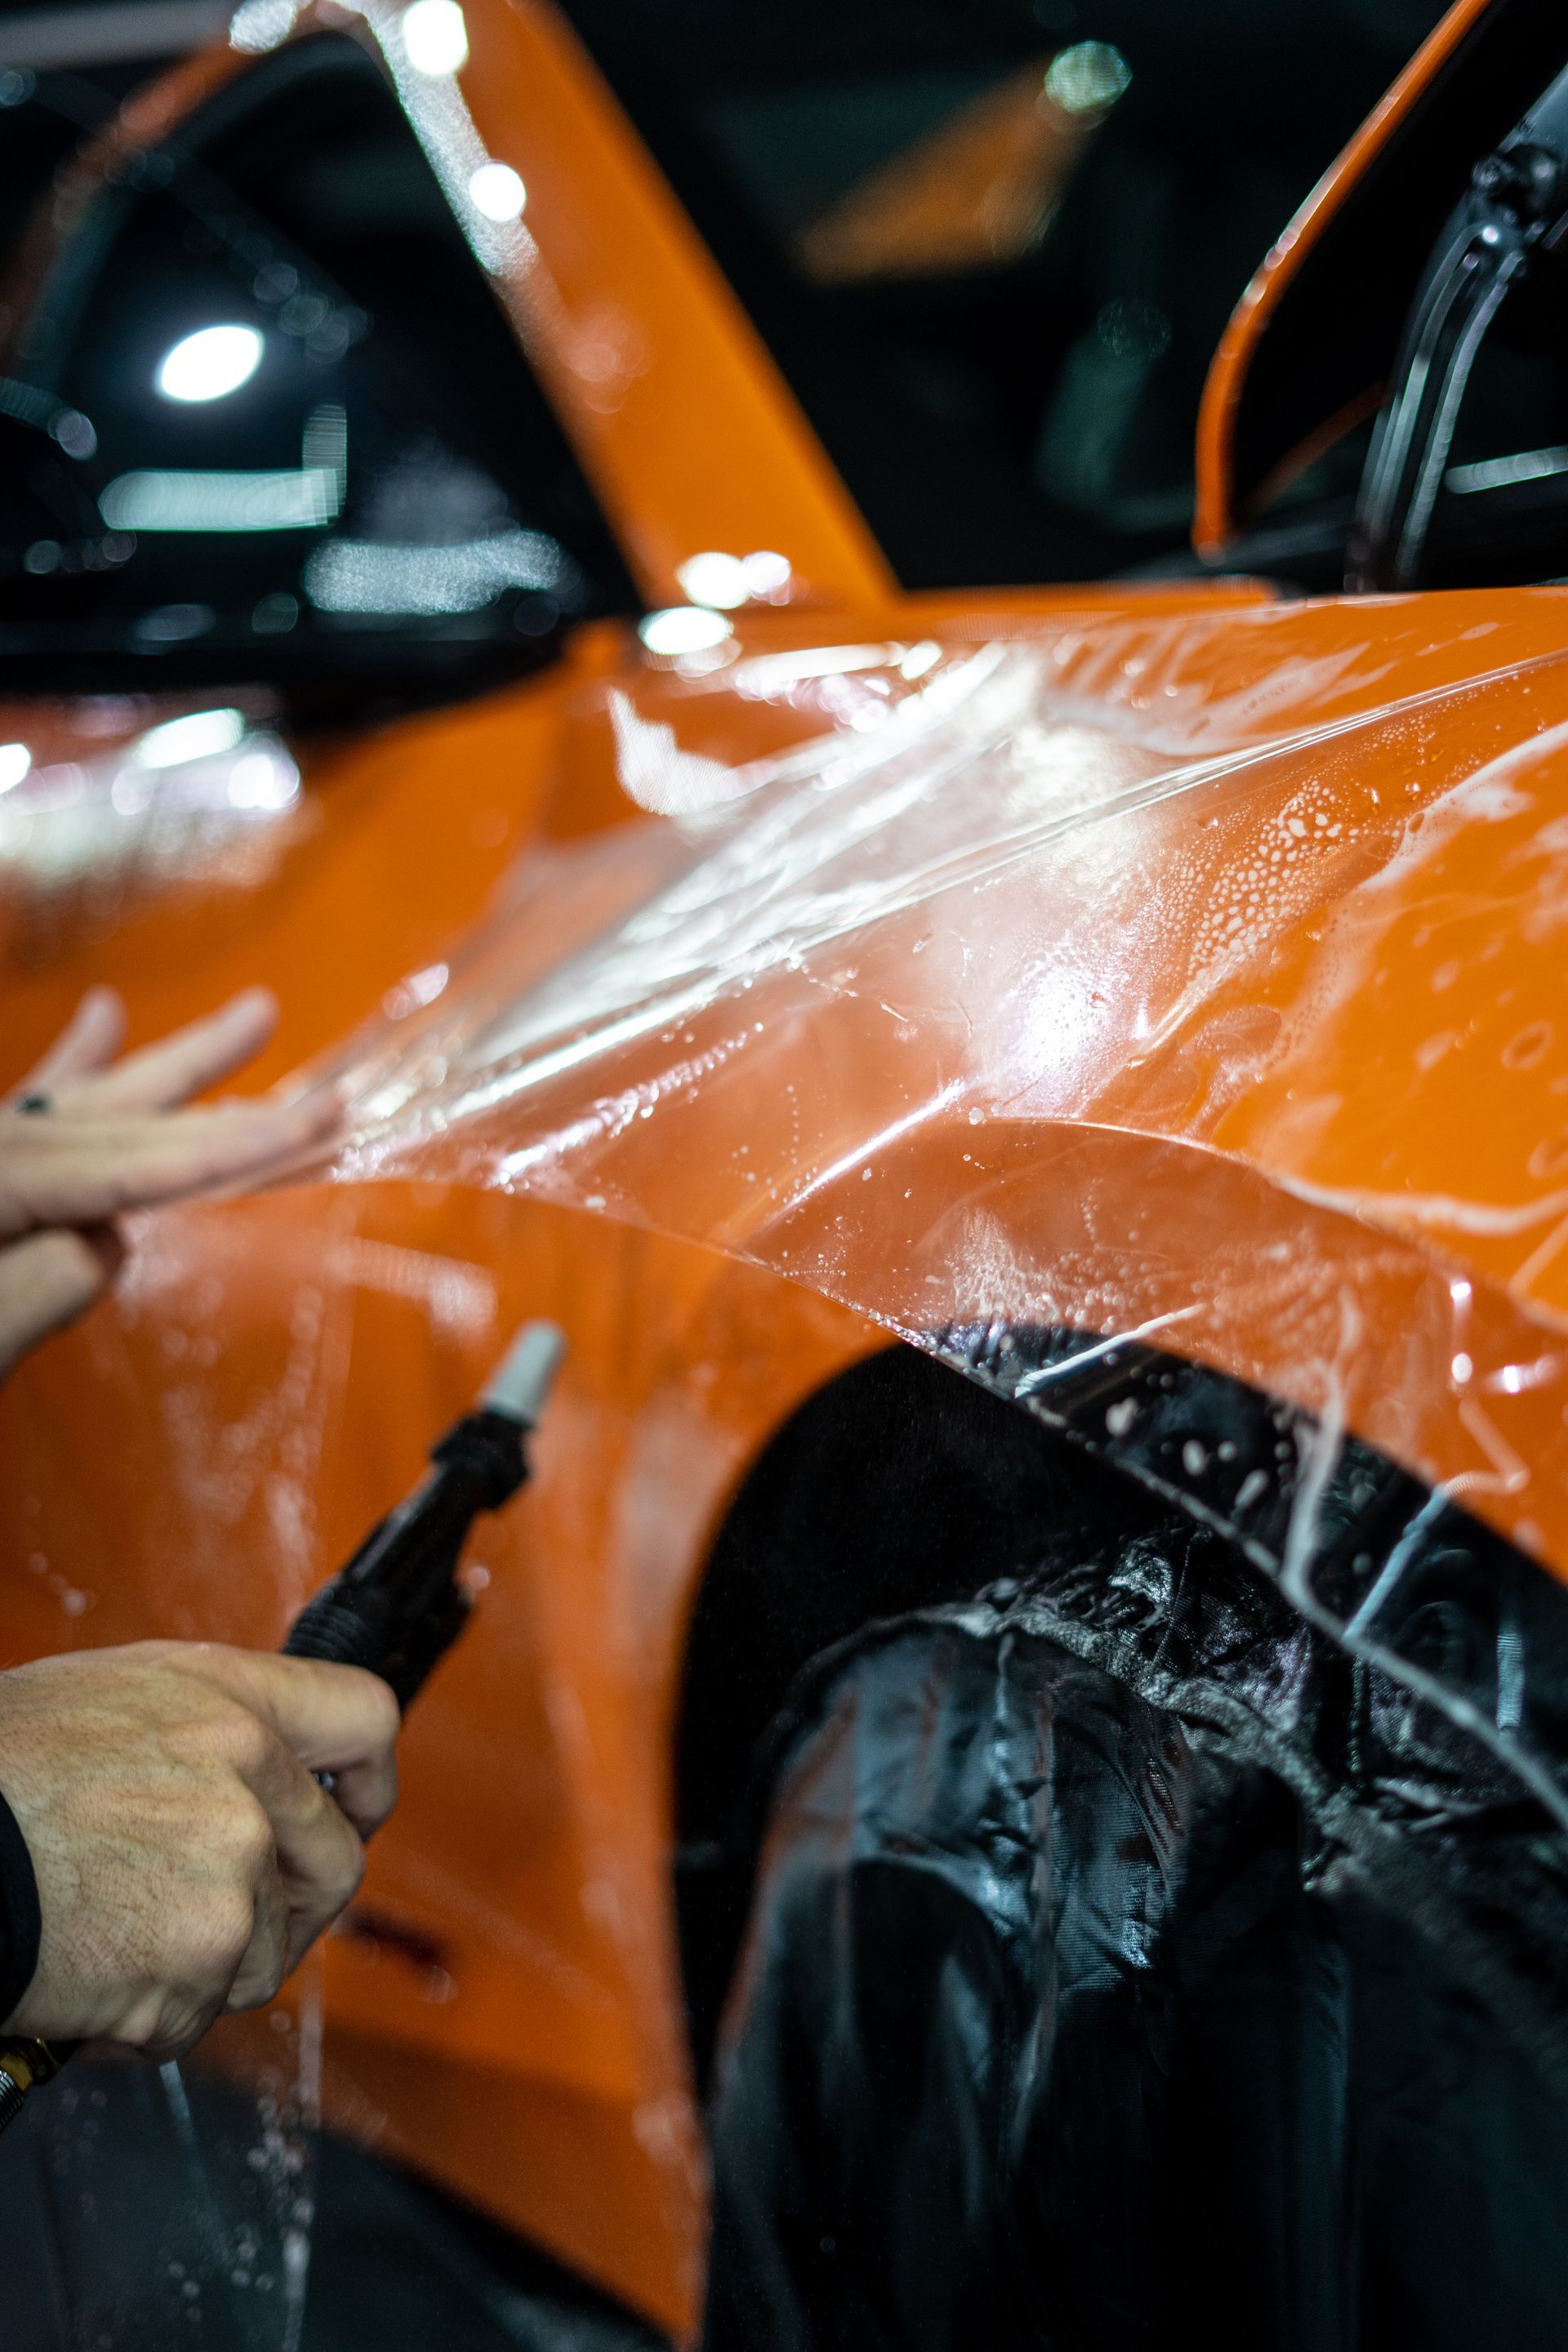 A person is applying a protective film to the side of an orange car.